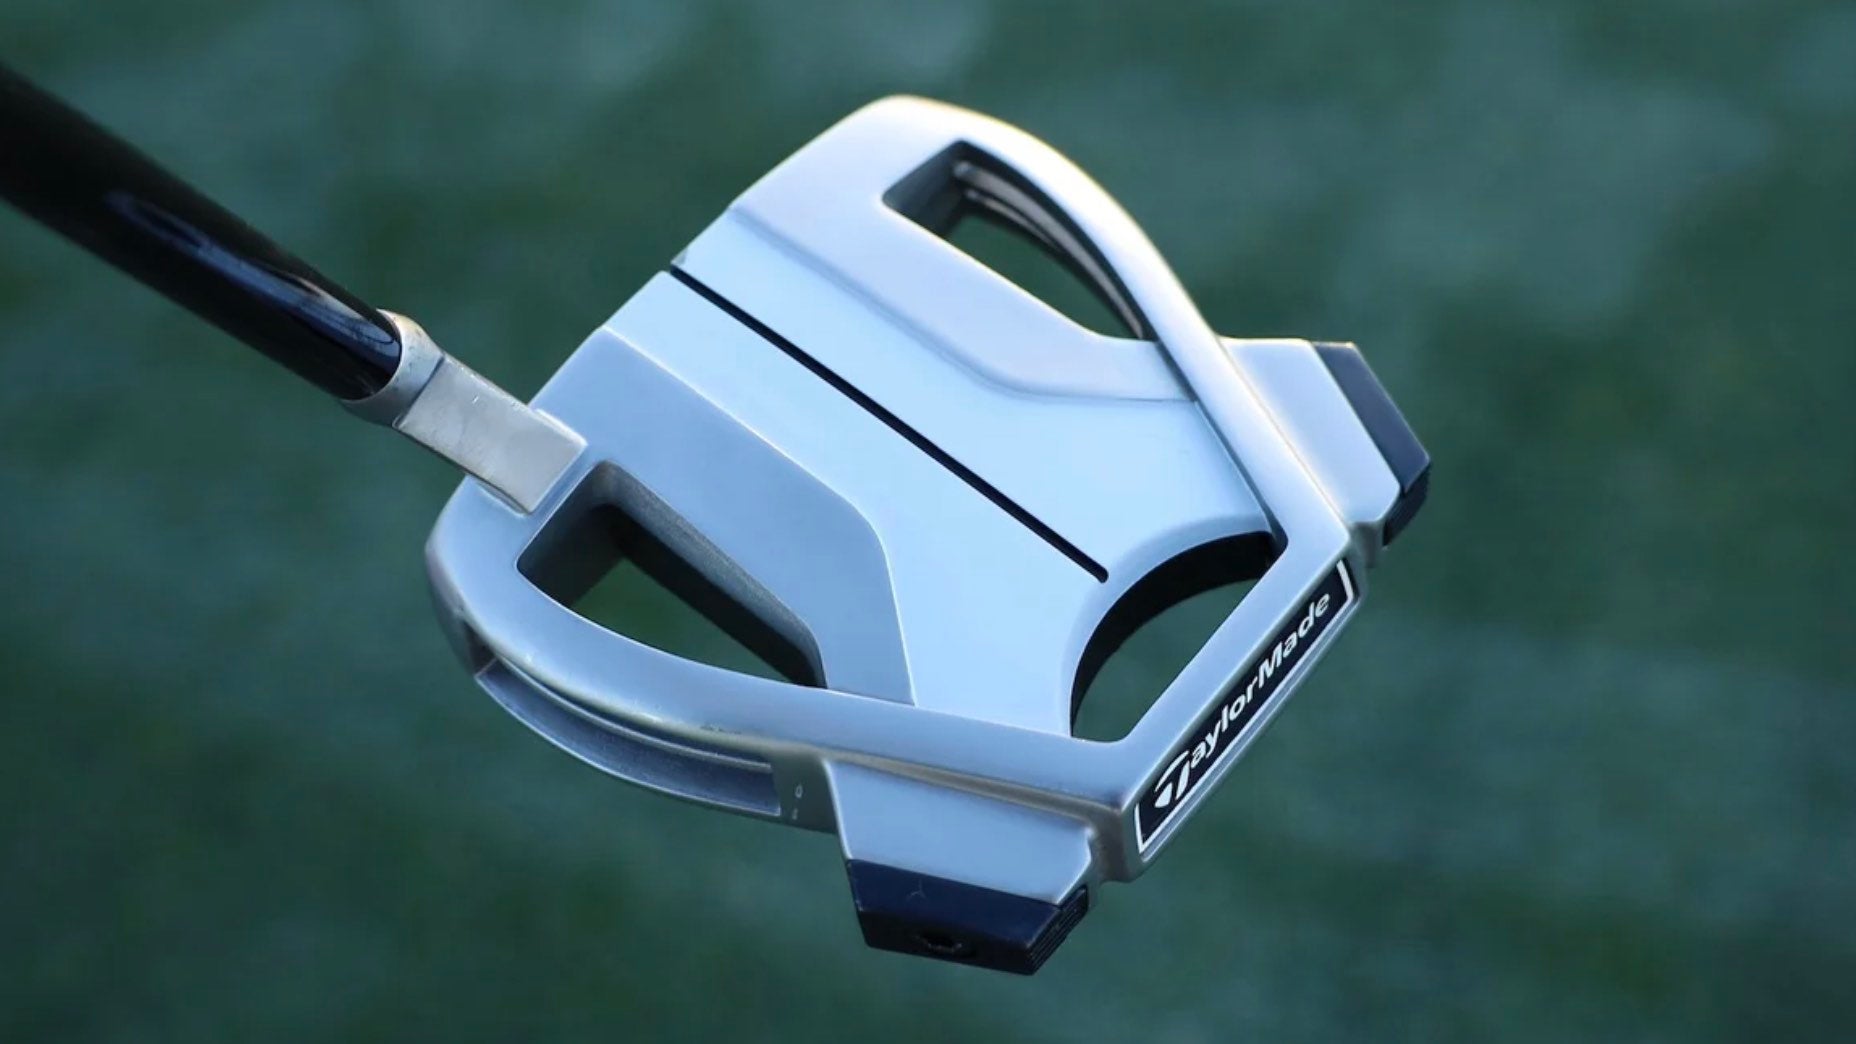 Rory McIlroy's TaylorMade Spider putter